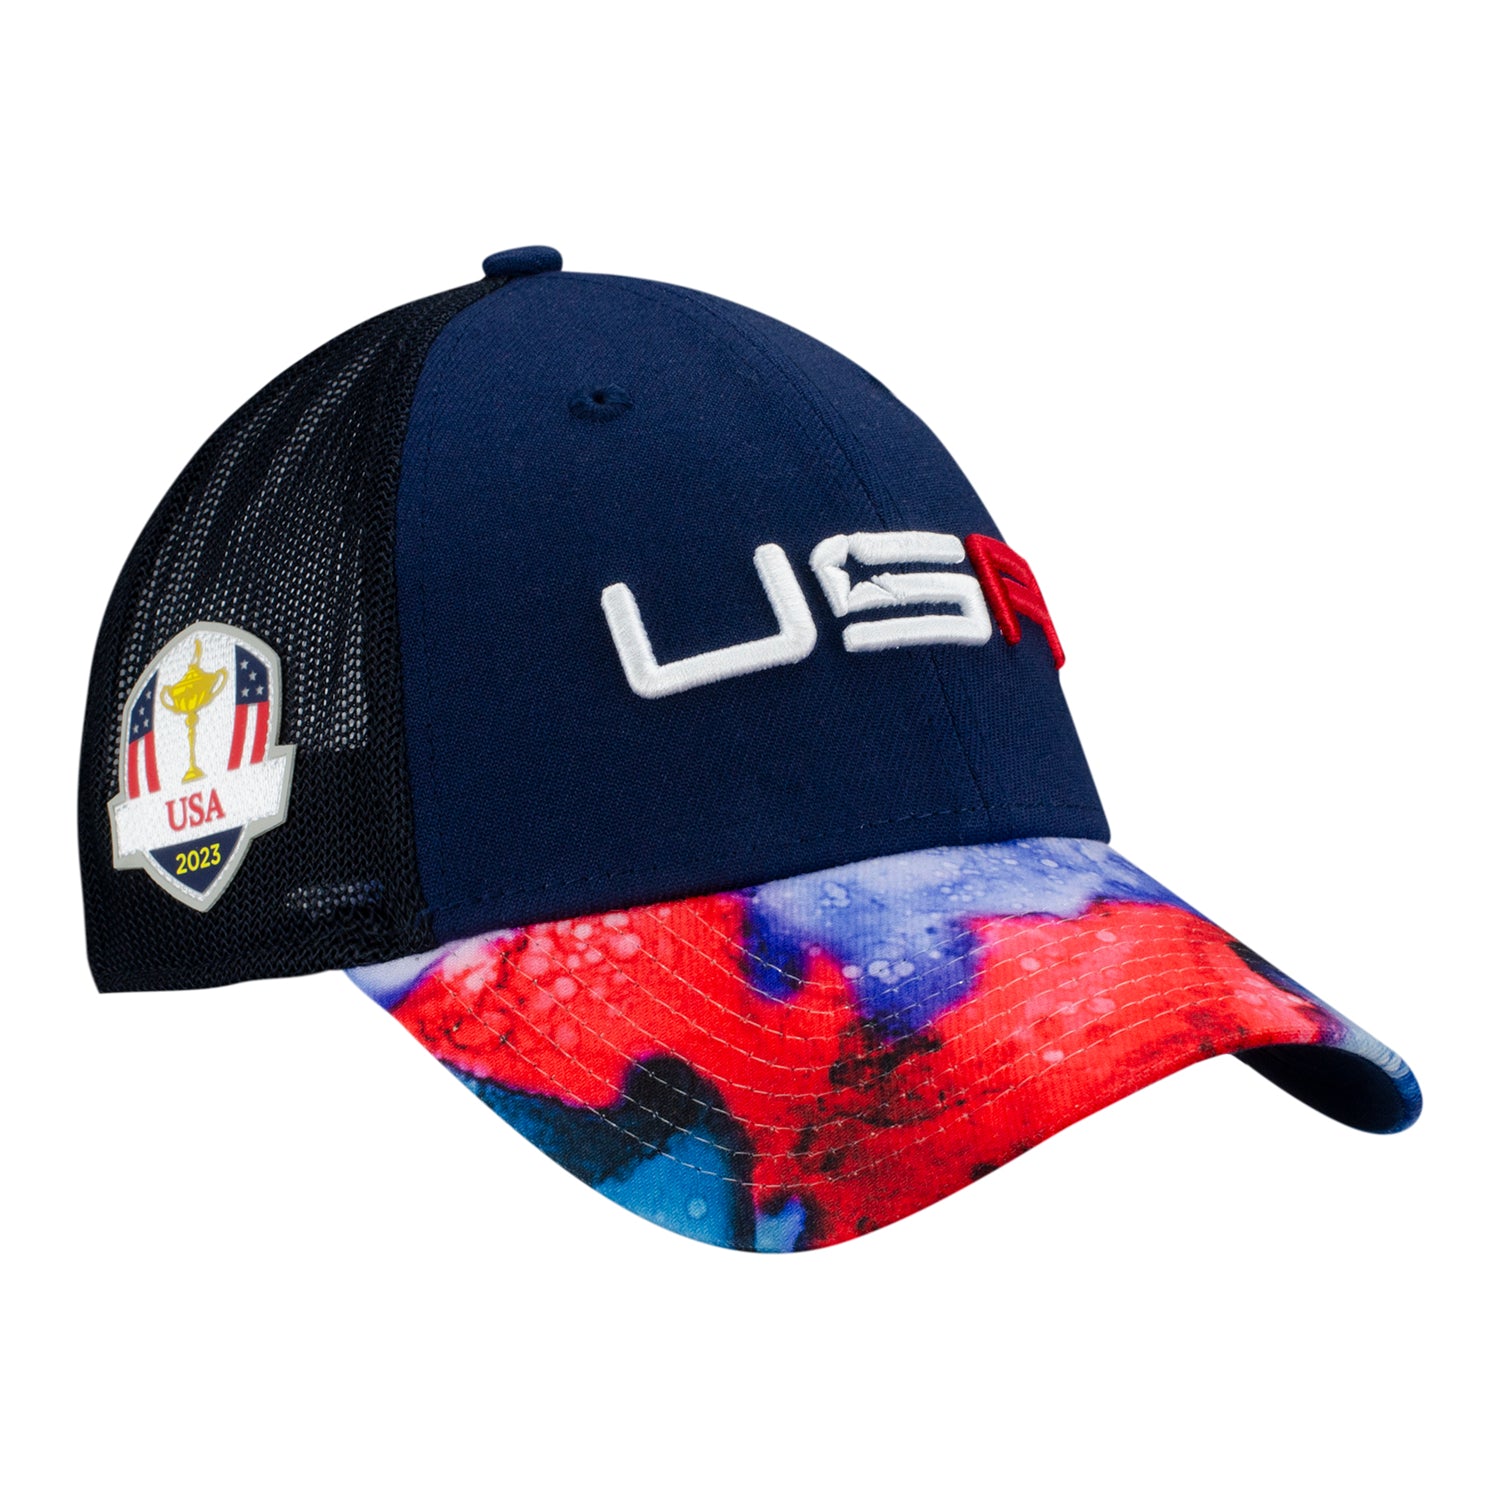 2023 Ryder Cup Welcome to The Team 9FORTY Stretch Snap Hat, Blue, by New Era